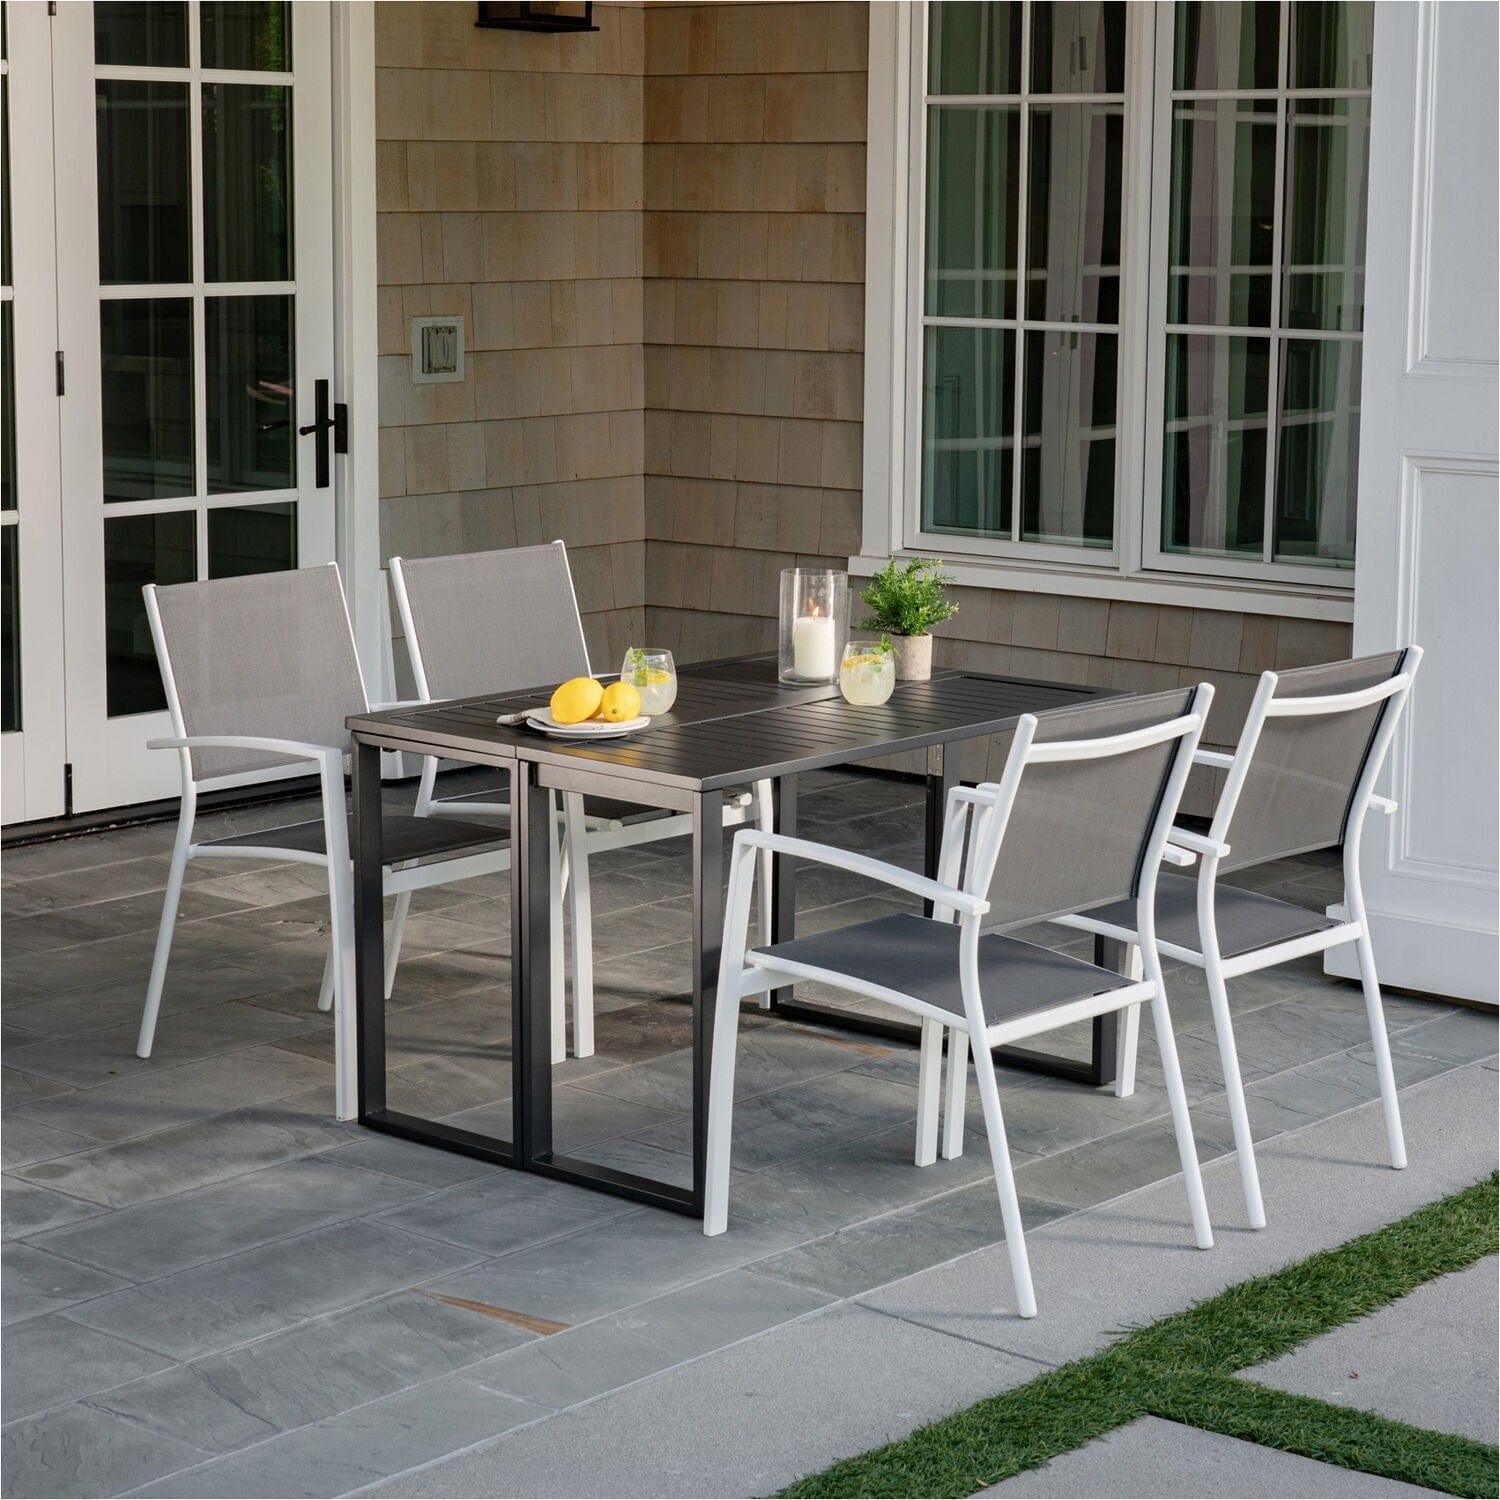 Hanover Outdoor Dining Set Conrad 5-Piece Compact Outdoor Dining Set w/ 4 Stackable Sling Chairs and Convertible Slatted Table, White Frame / Gray Sling CONDN5PC-WHT | CONDN5PC-WHT